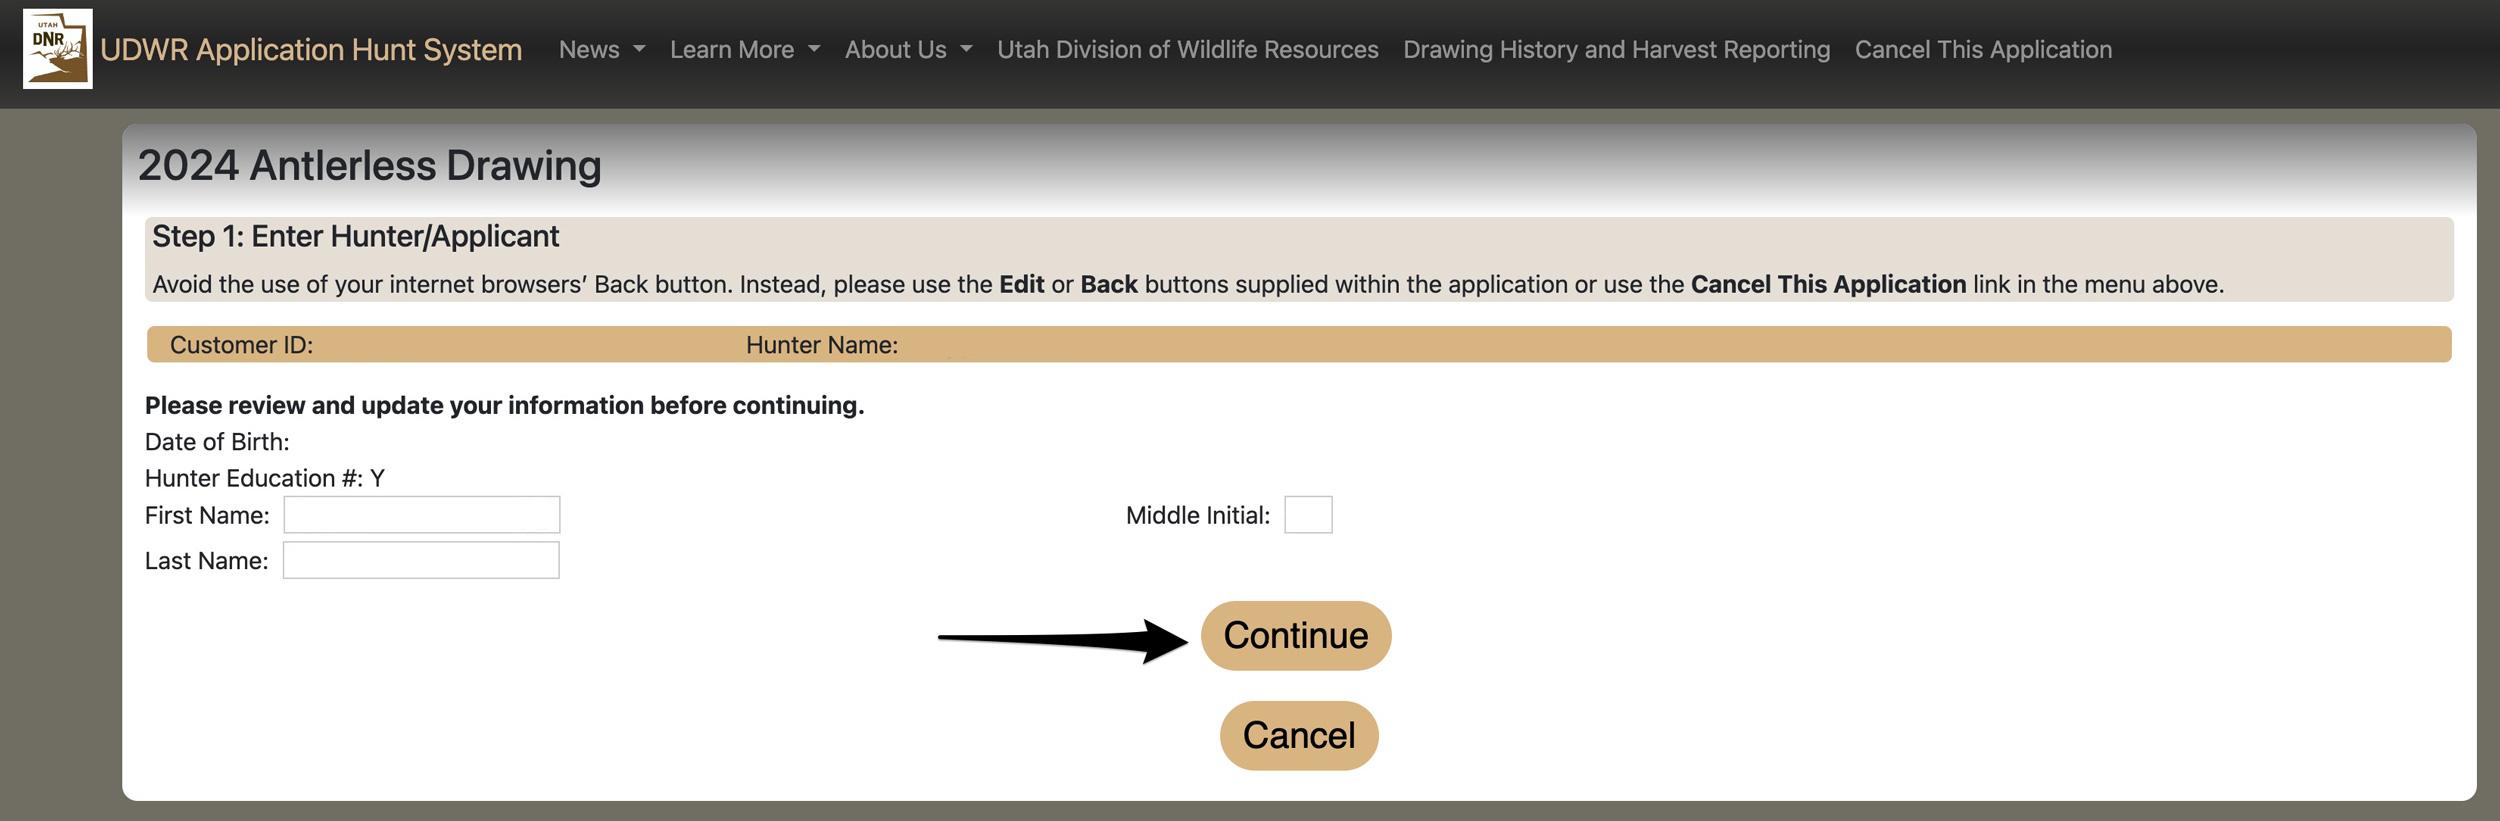 Verifying hunting information on Utah licensing page before continuing